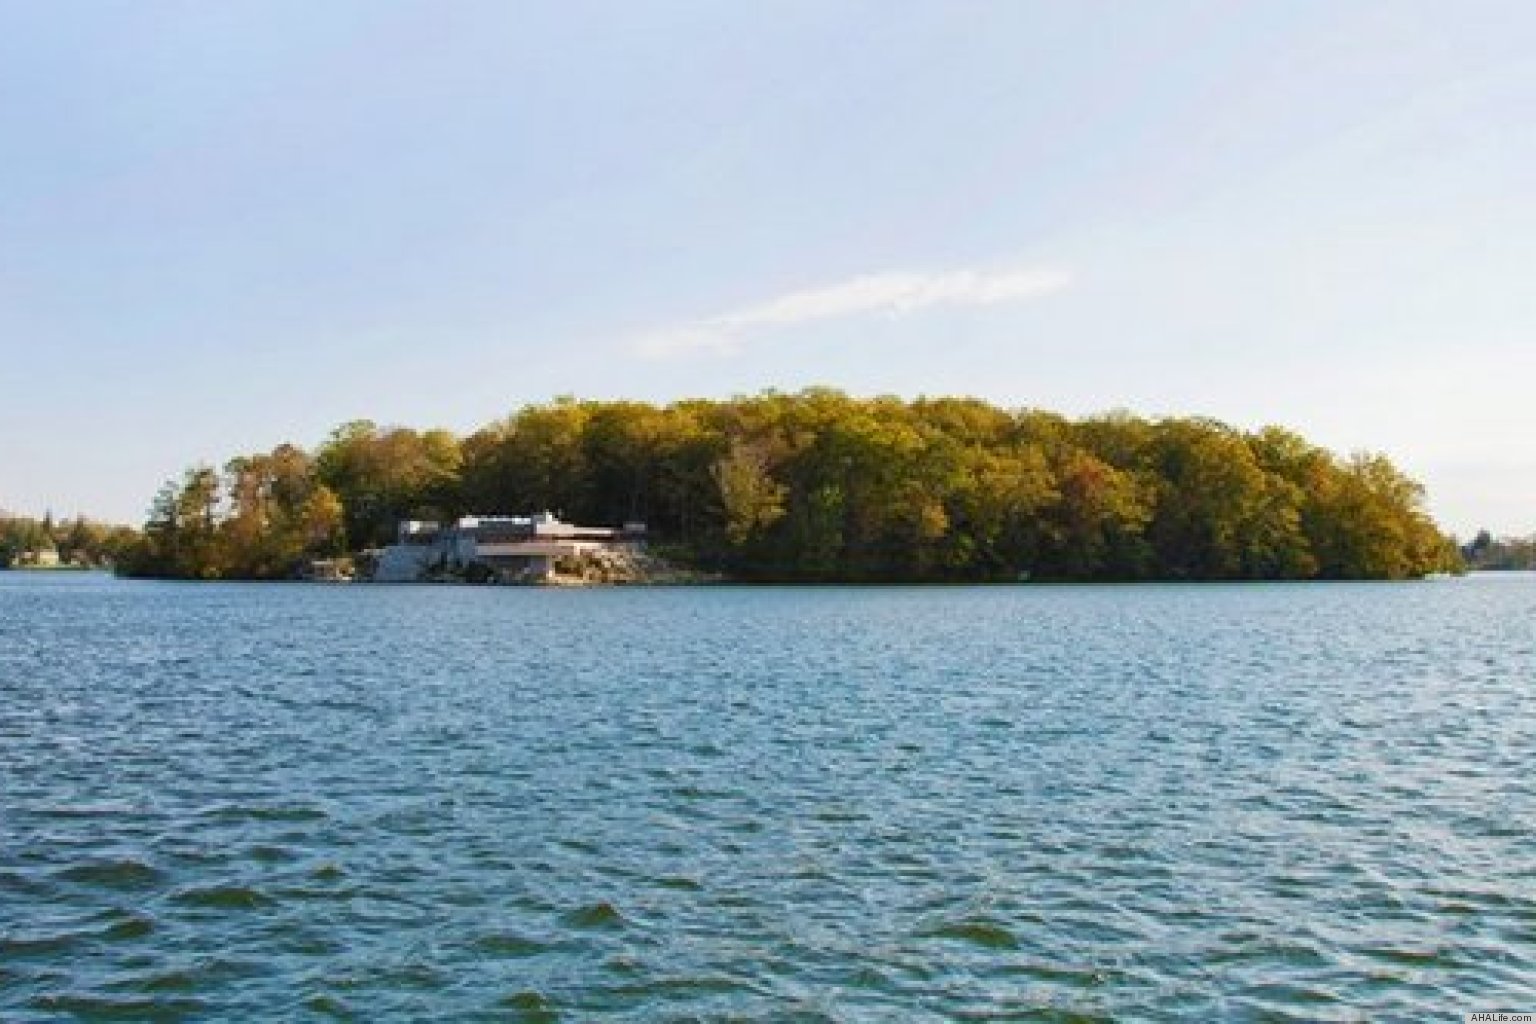 Heart-Shaped Island For Sale: Buy This Controversial Frank Lloyd Wright